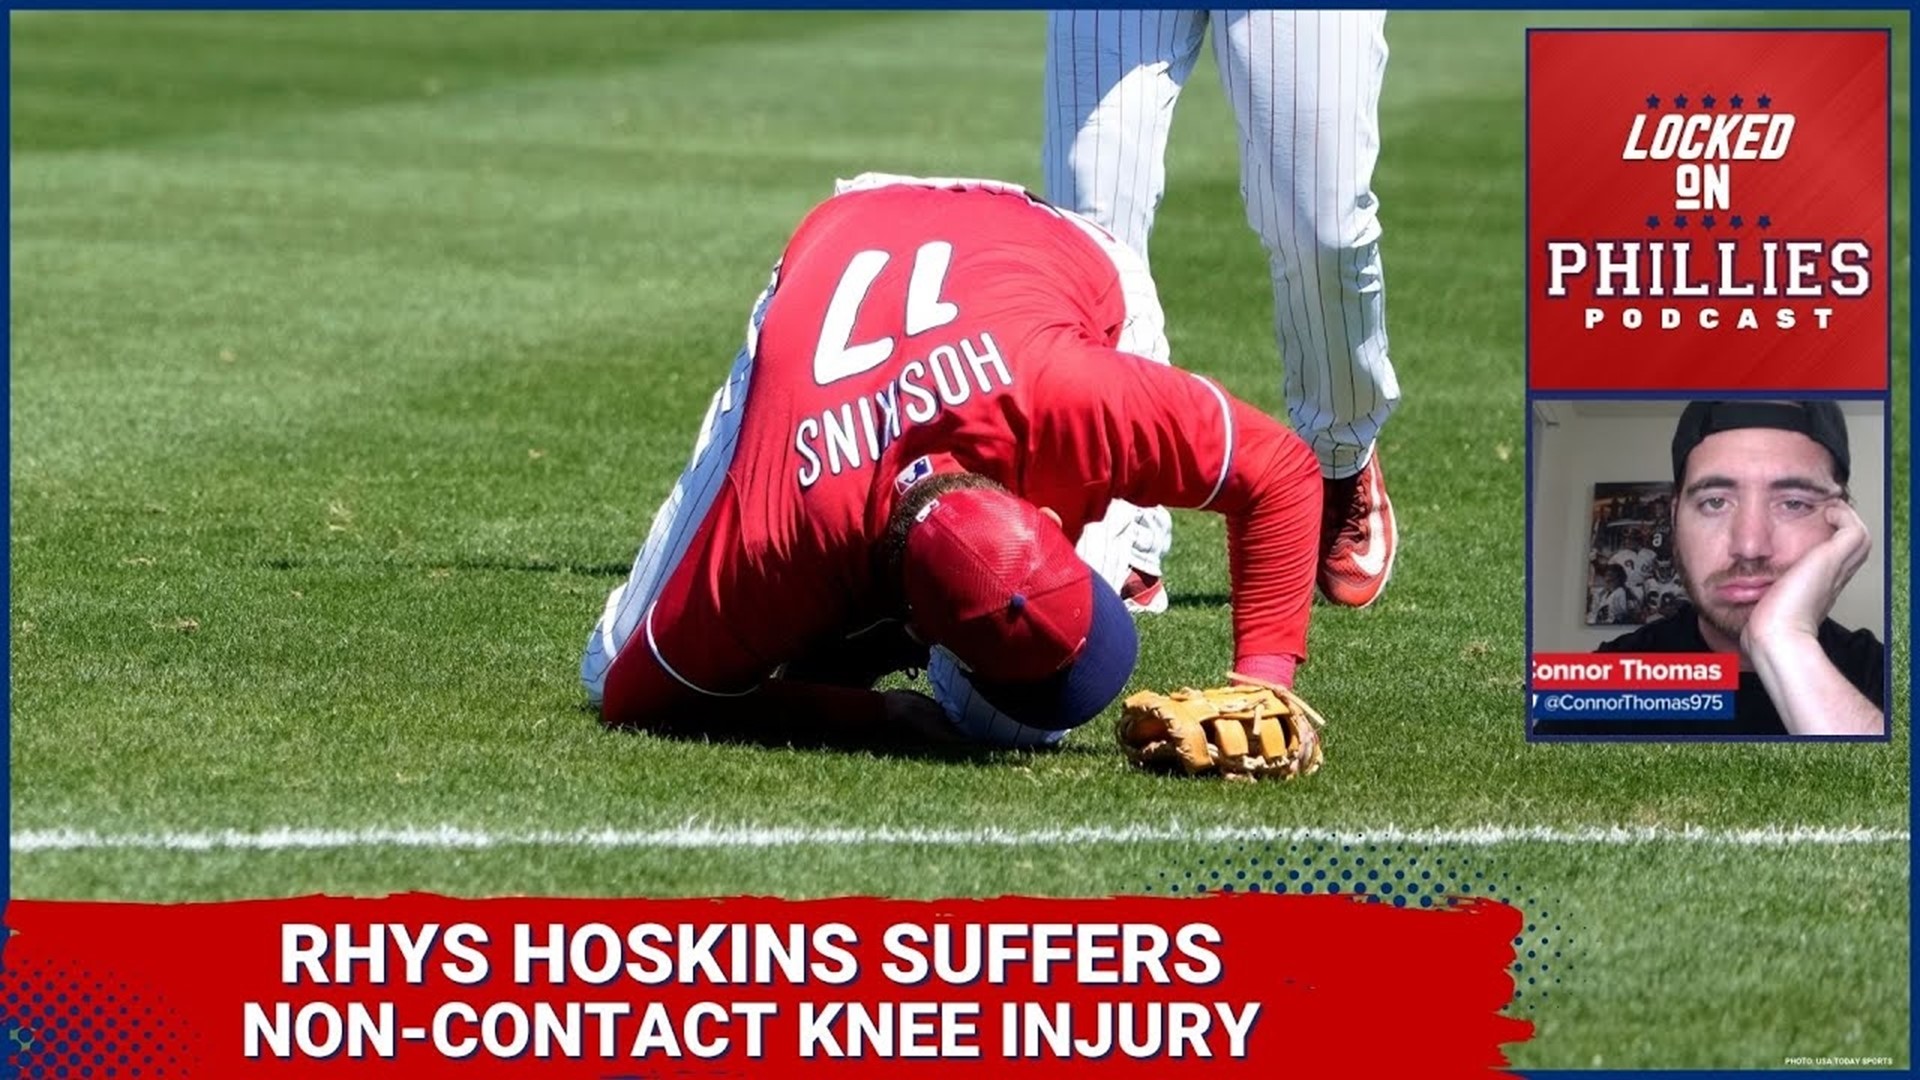 In today's episode, Connor reacts to Rhys Hoskins' non-contact knee injury from today's Philadelphia Phillies Spring Training game with the Detroit Tigers.